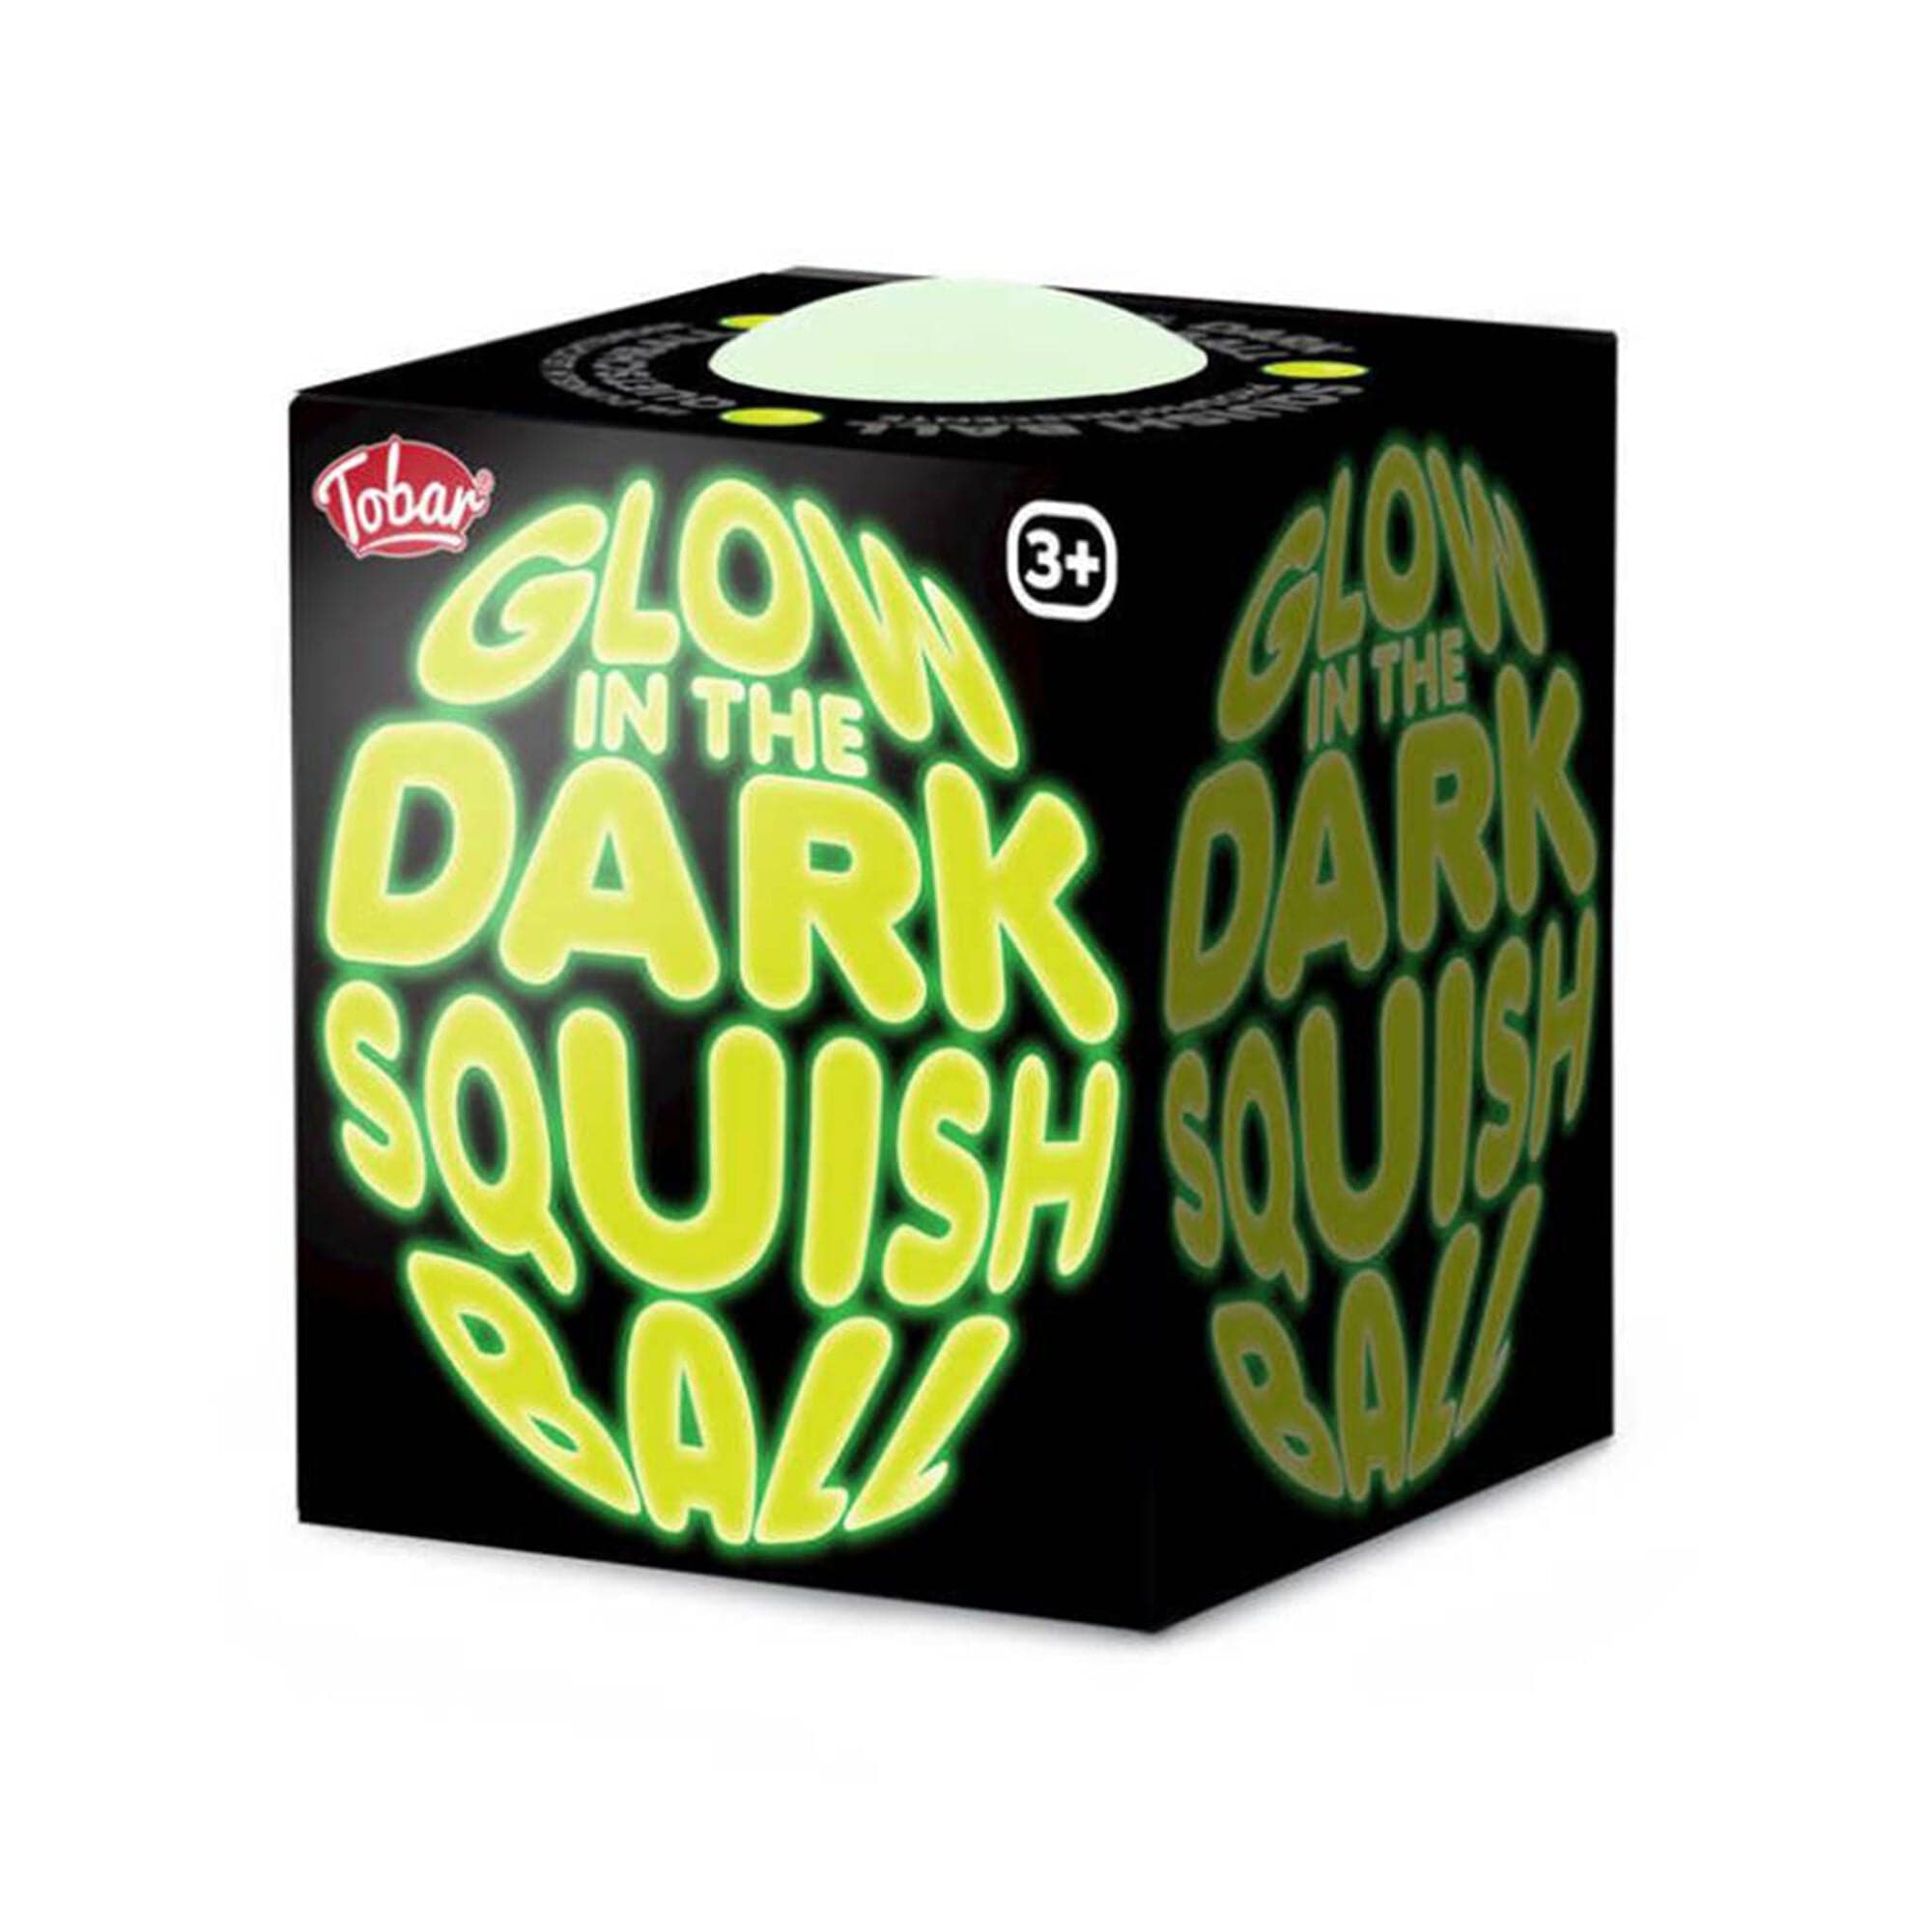 Glow in the Dark Squish Ball Fidget Toy, This super glow in the Dark Squish Ball appears an 'off white' colour in normal light, but after exposed to light and then put in the dark, or used under UV blacklight it glows in a bright vibrant green. Kids and adults will love playing with this Glow in the Dark Squish Ball, for adults it's the ultimate stress ball, and for kids it's the perfect tactile fidget toy.Need to mellow out? Glow in the Dark Squish Ball is the Groovy Glob that excites your eyes while it so